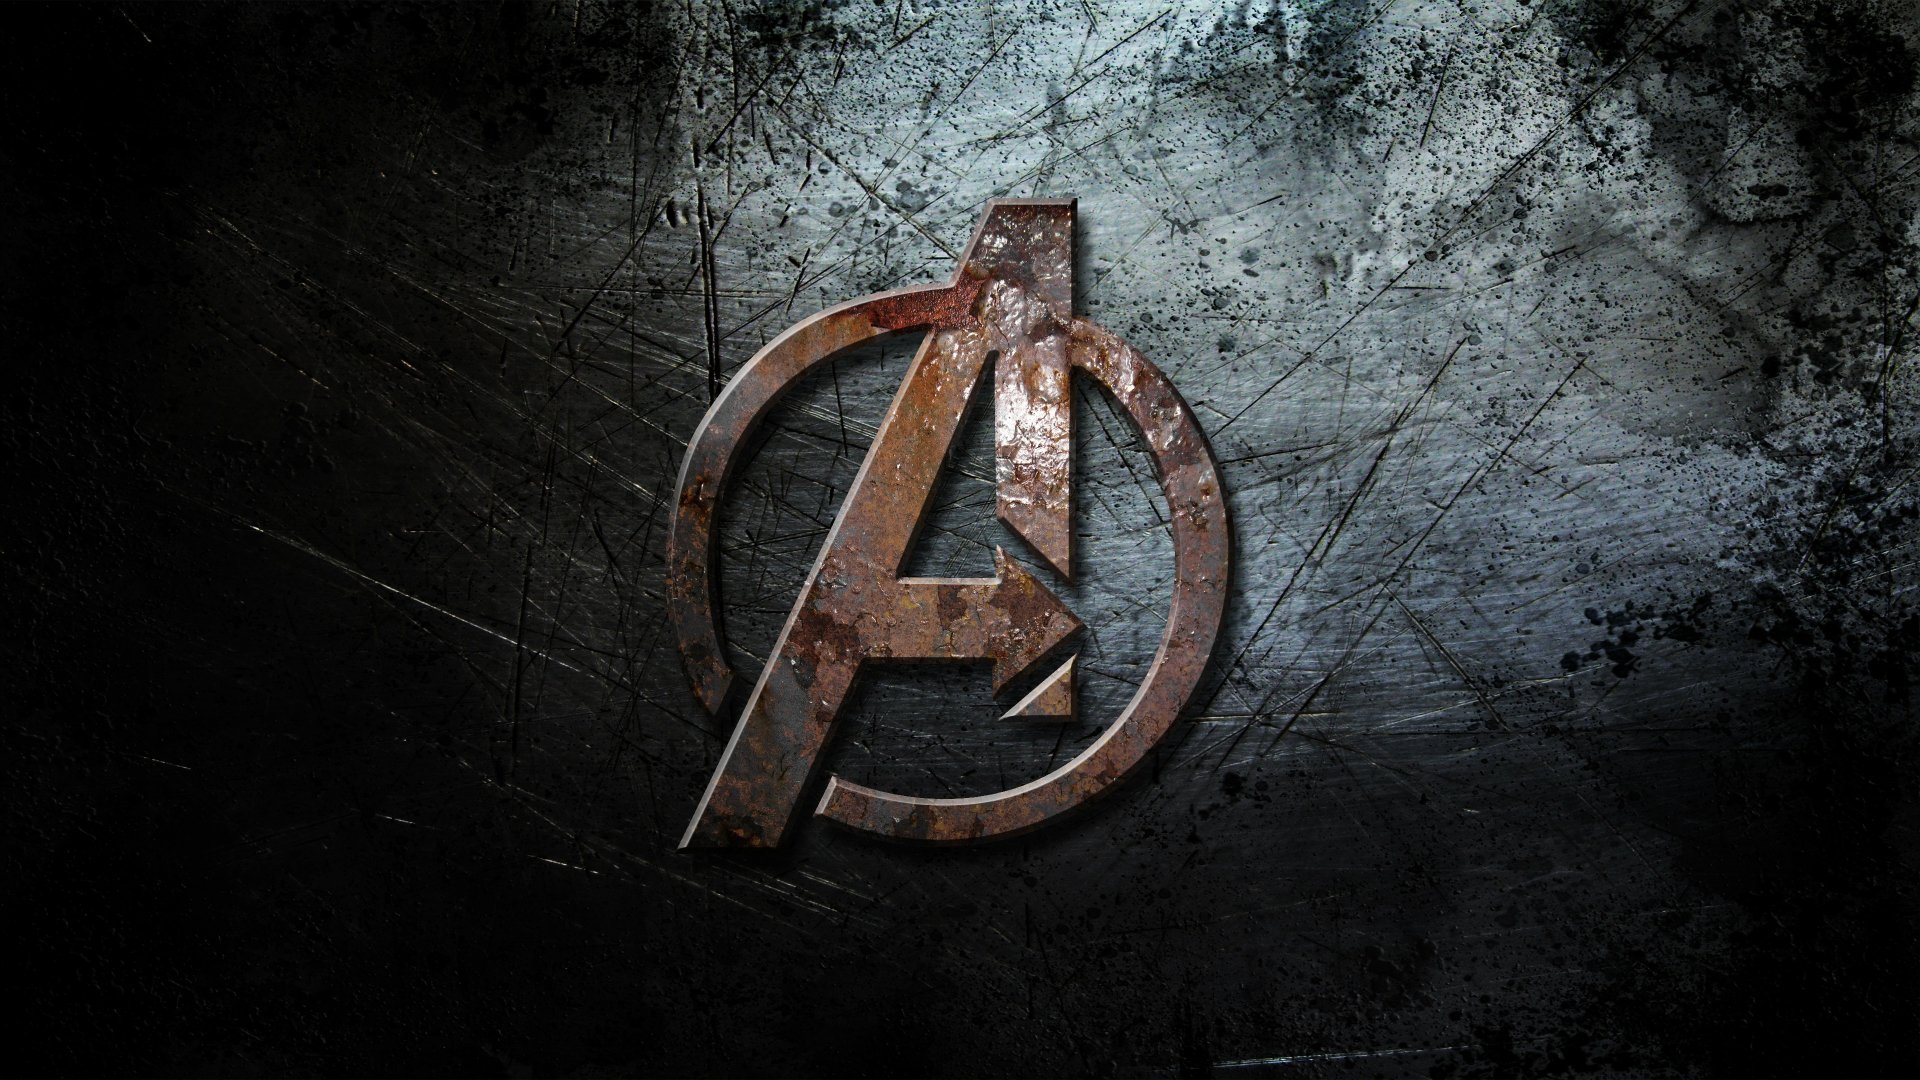 The Avengers free downloads